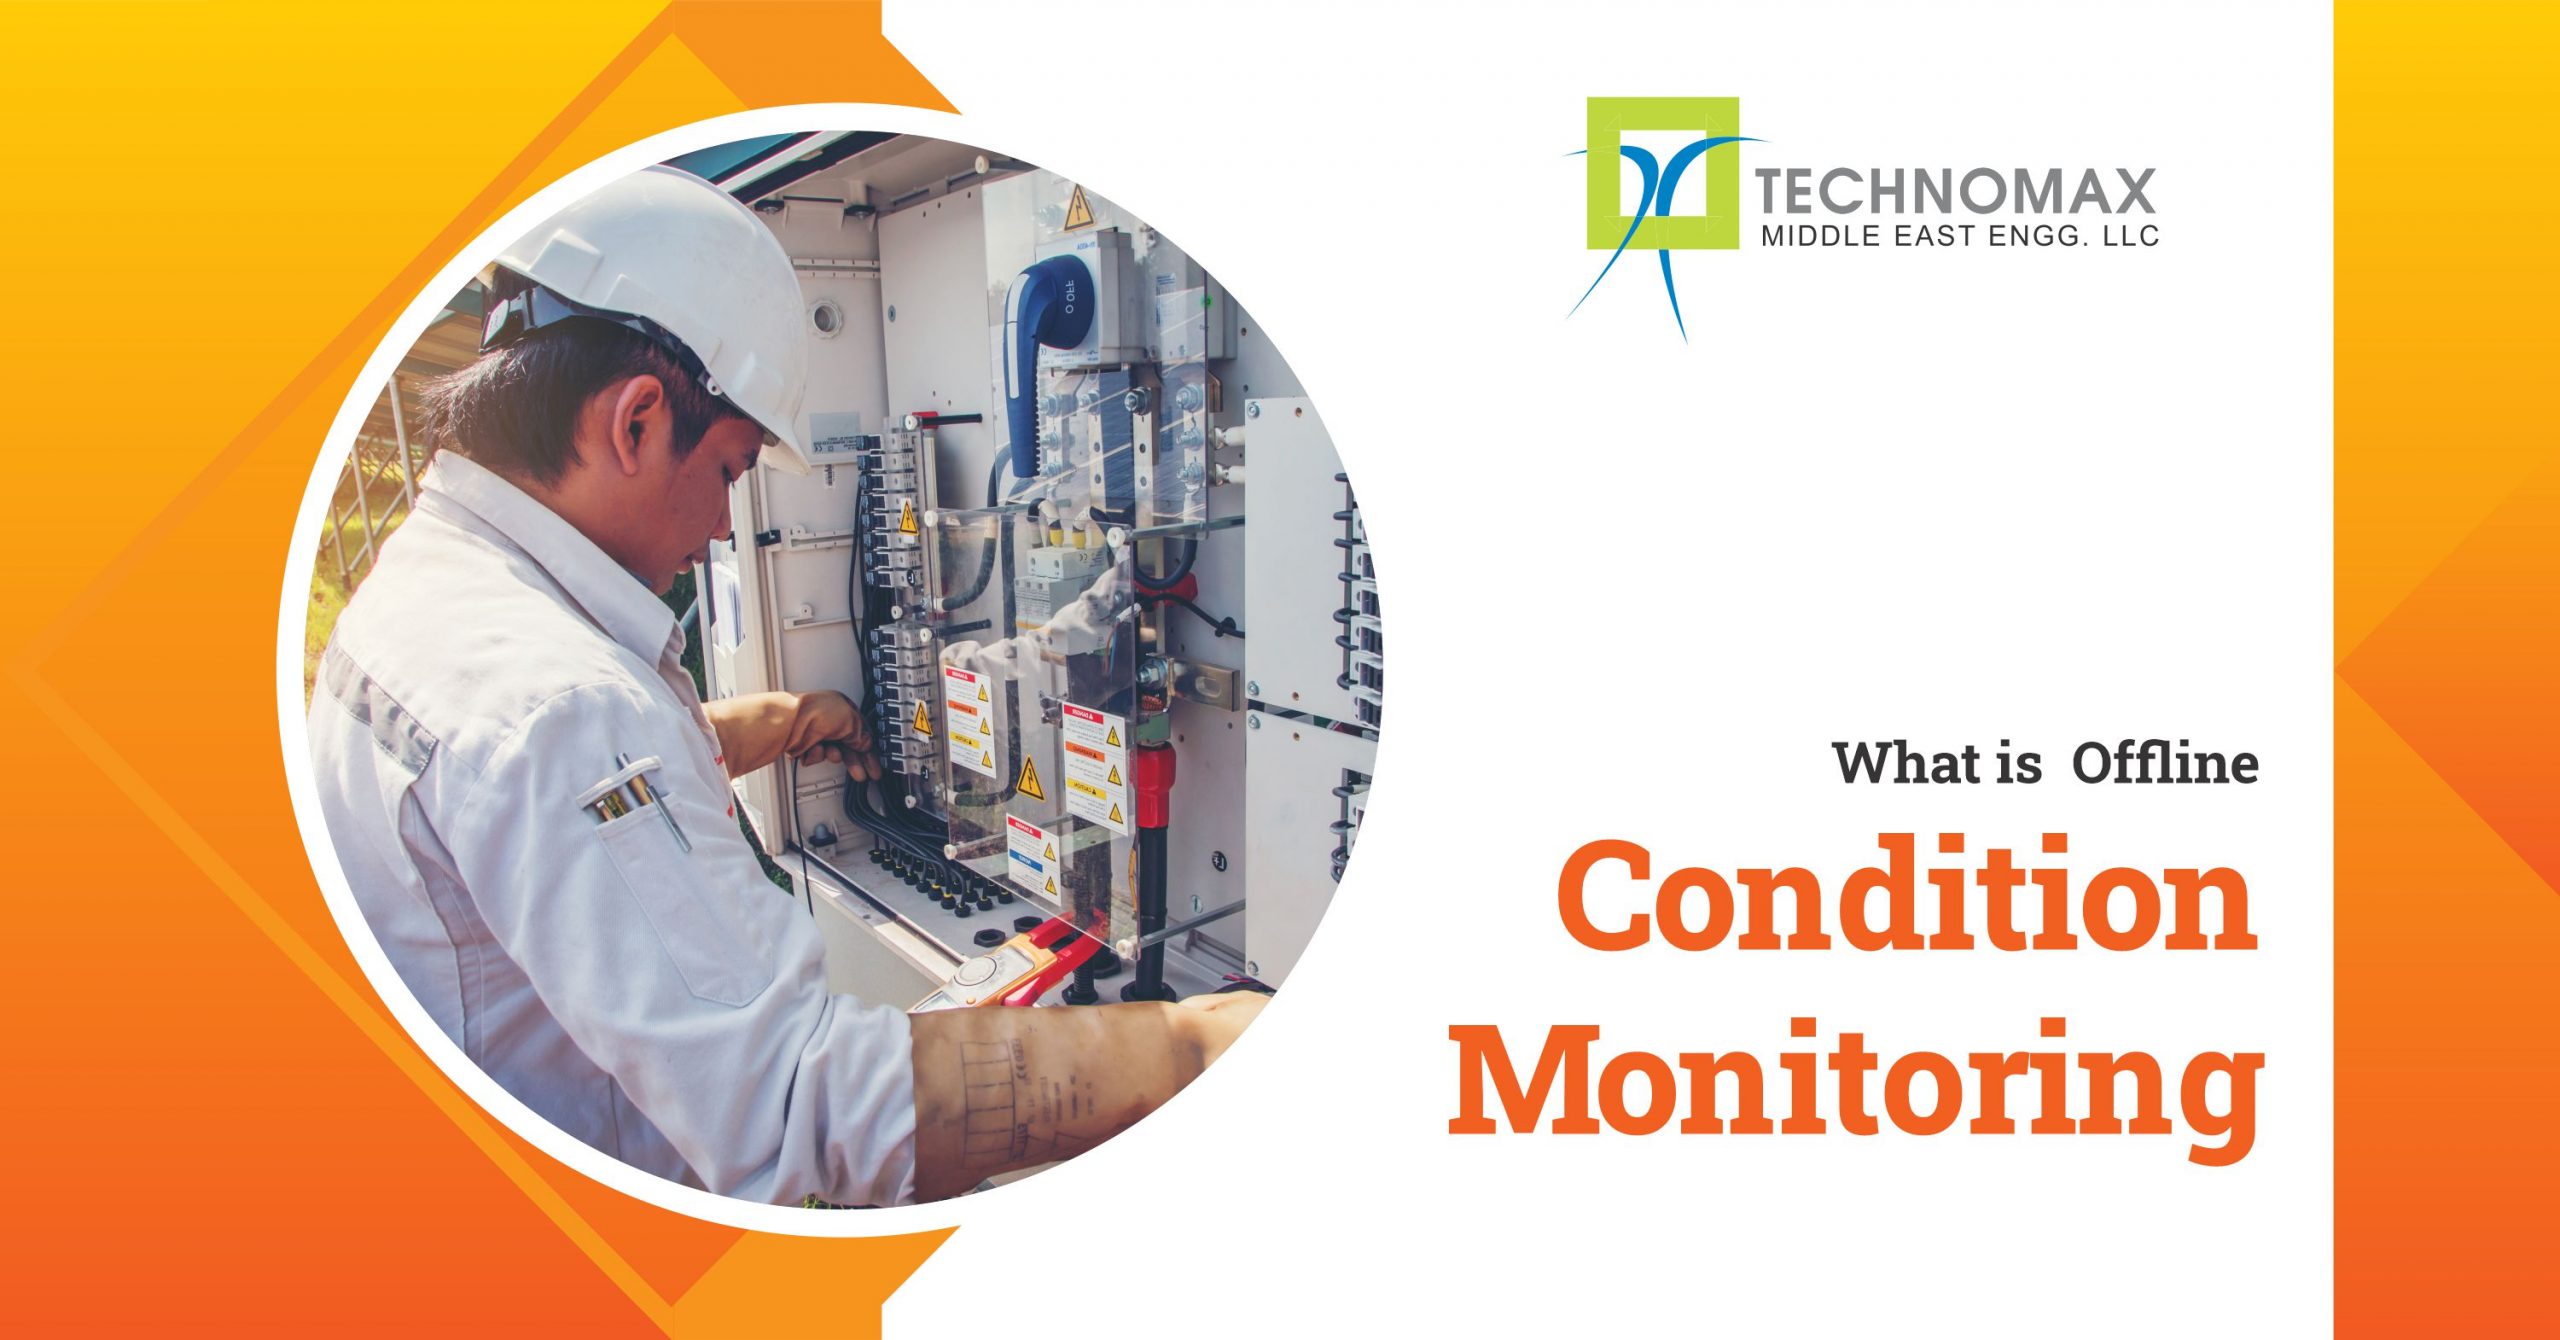 What is Offline condition monitoring?